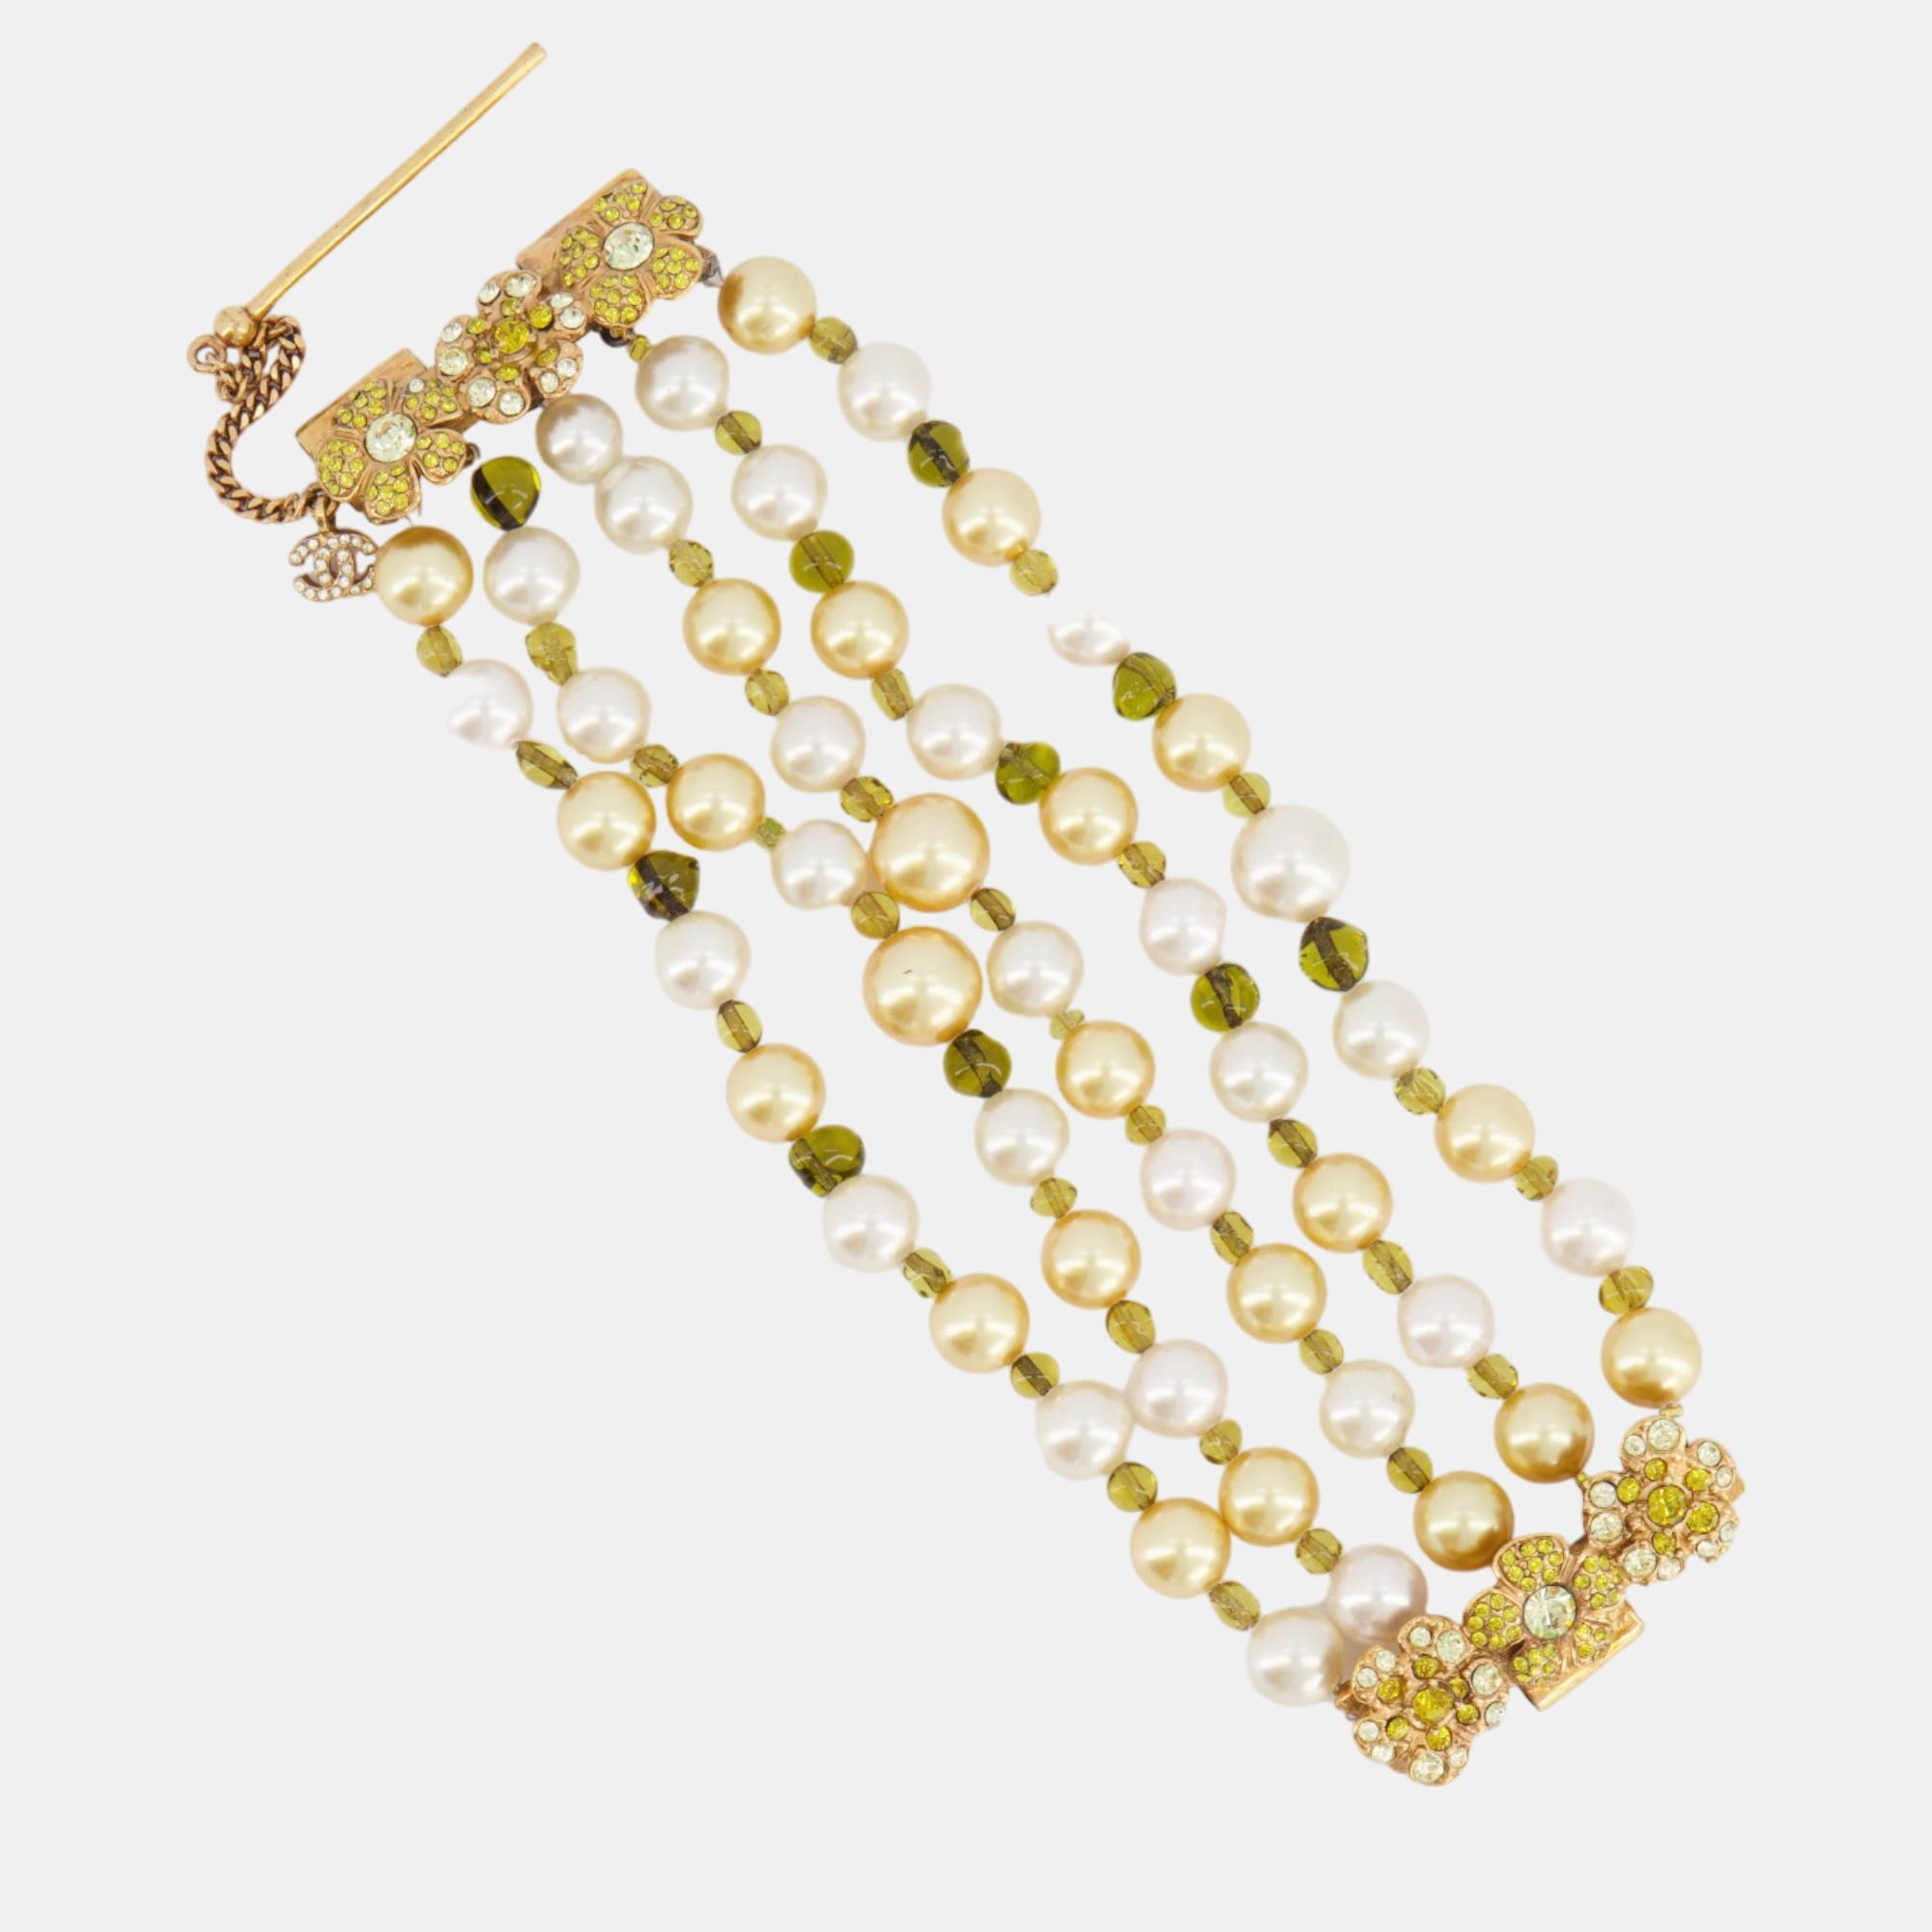 Chanel White, Yellow And Green Pearls Bracelet With Flower Crystal Embellishment